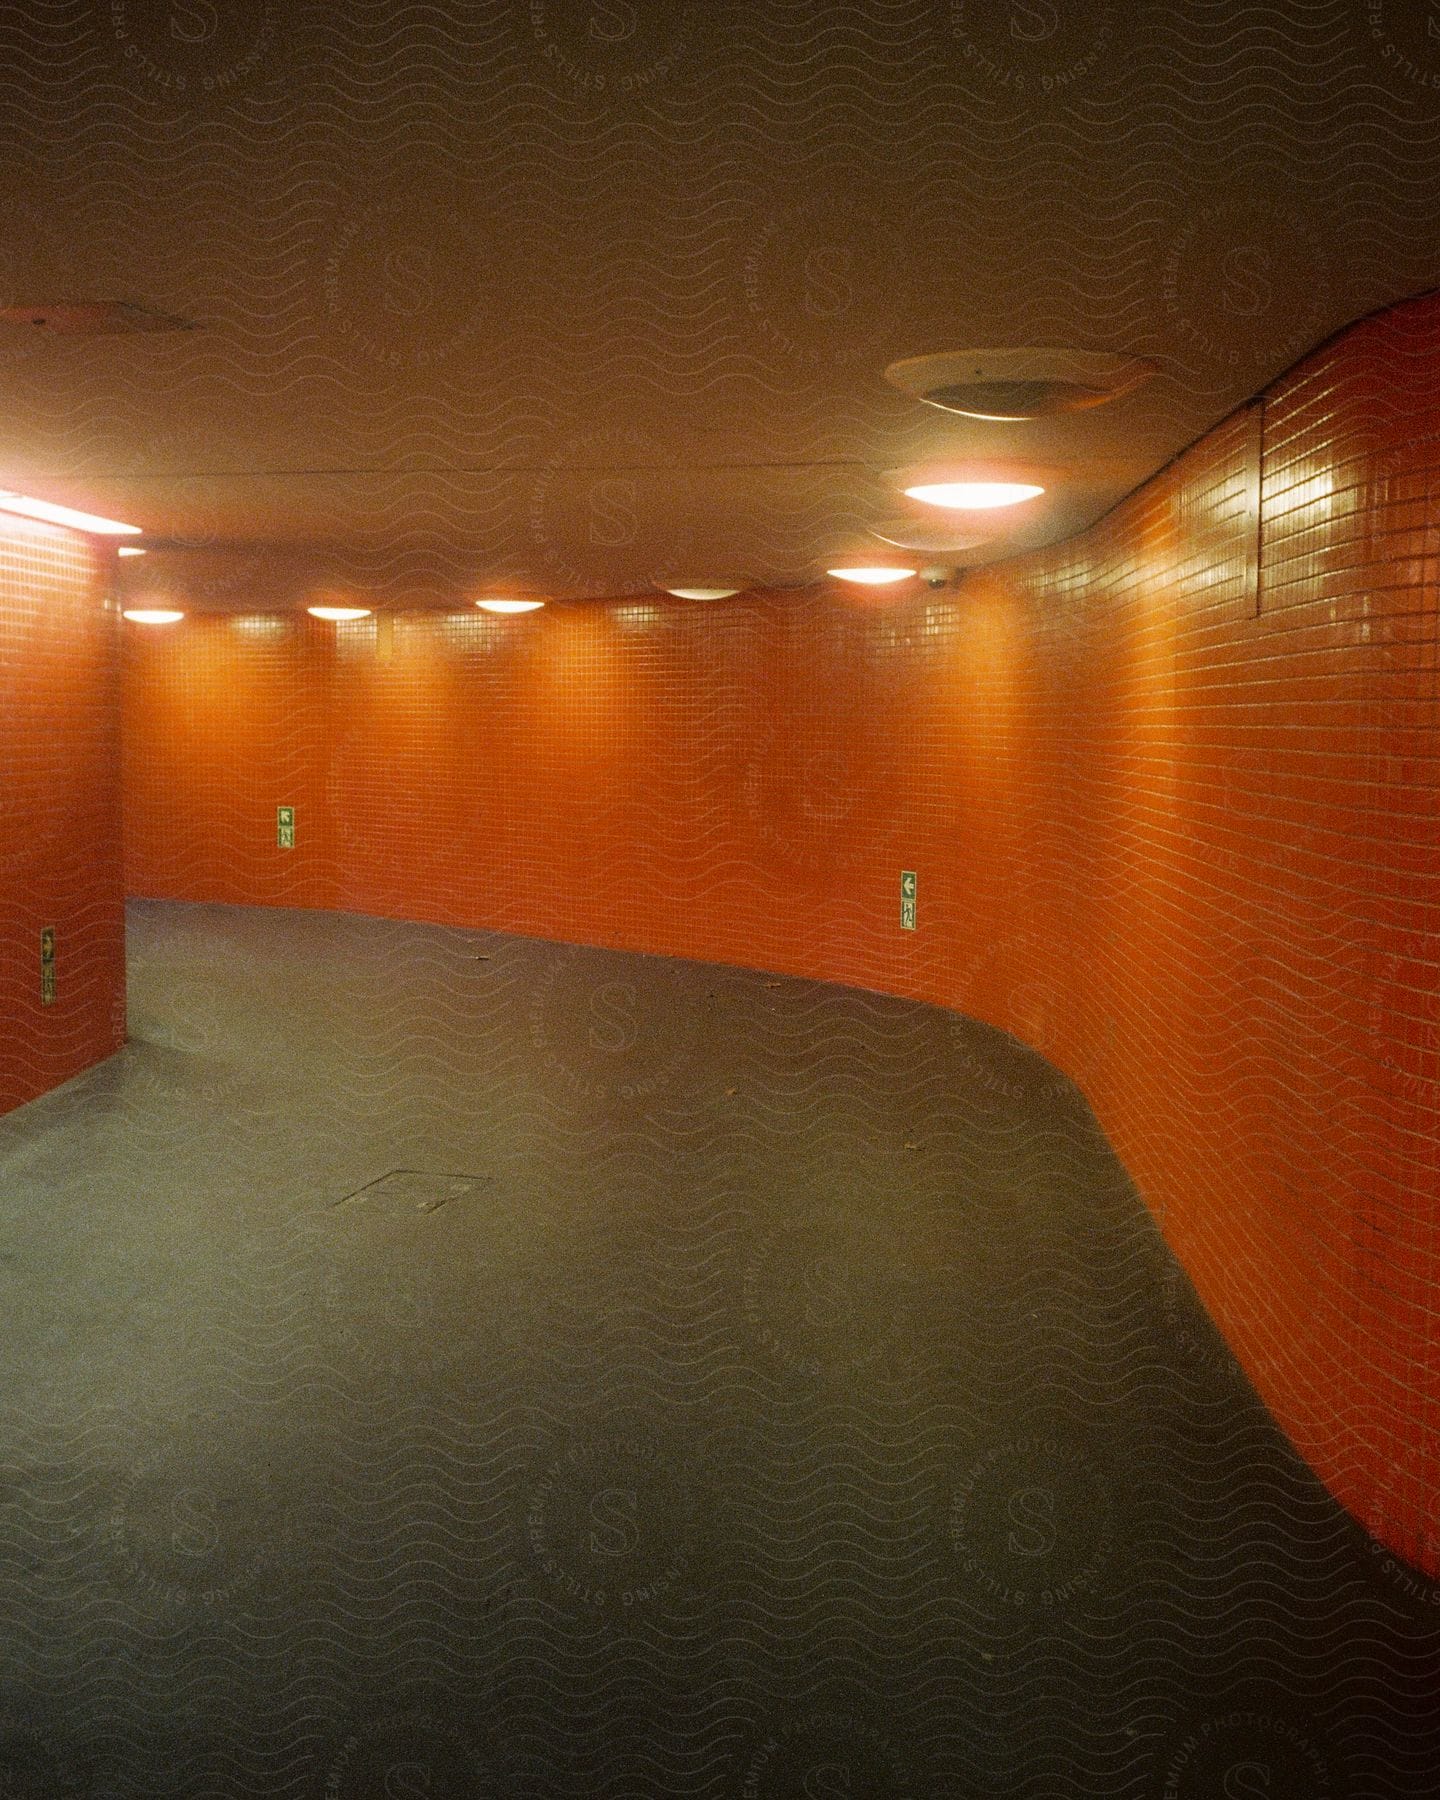 Corridor inside a building with black floor and red tiled walls